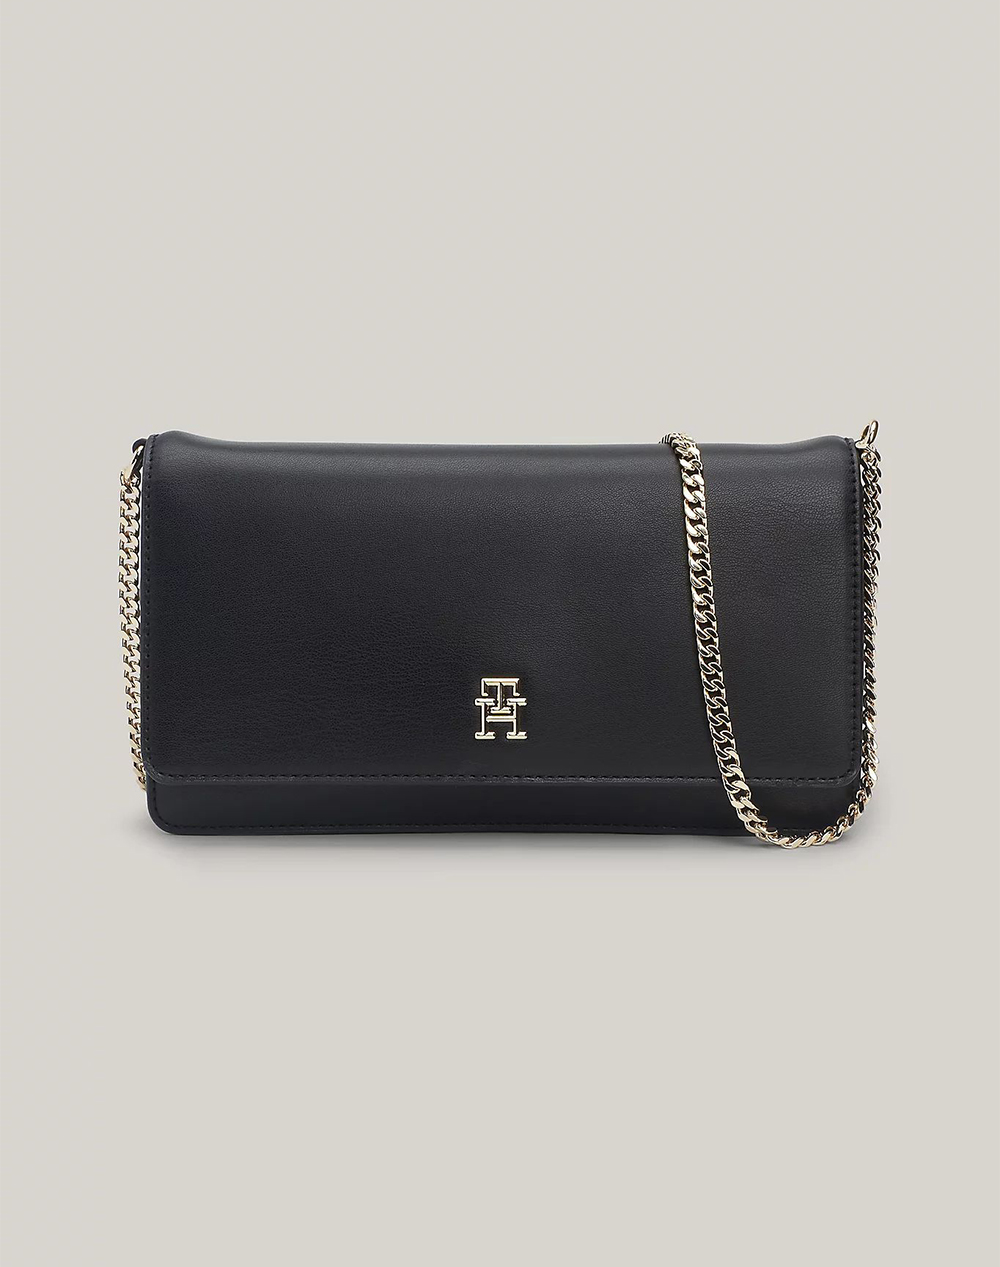 TOMMY HILFIGER TH REFINED CHAIN CROSSOVER (Διαστάσεις: 24 x 15 x 6.5 εκ) AW0AW16109-BDS Black 3810ATOMM6200241_9371